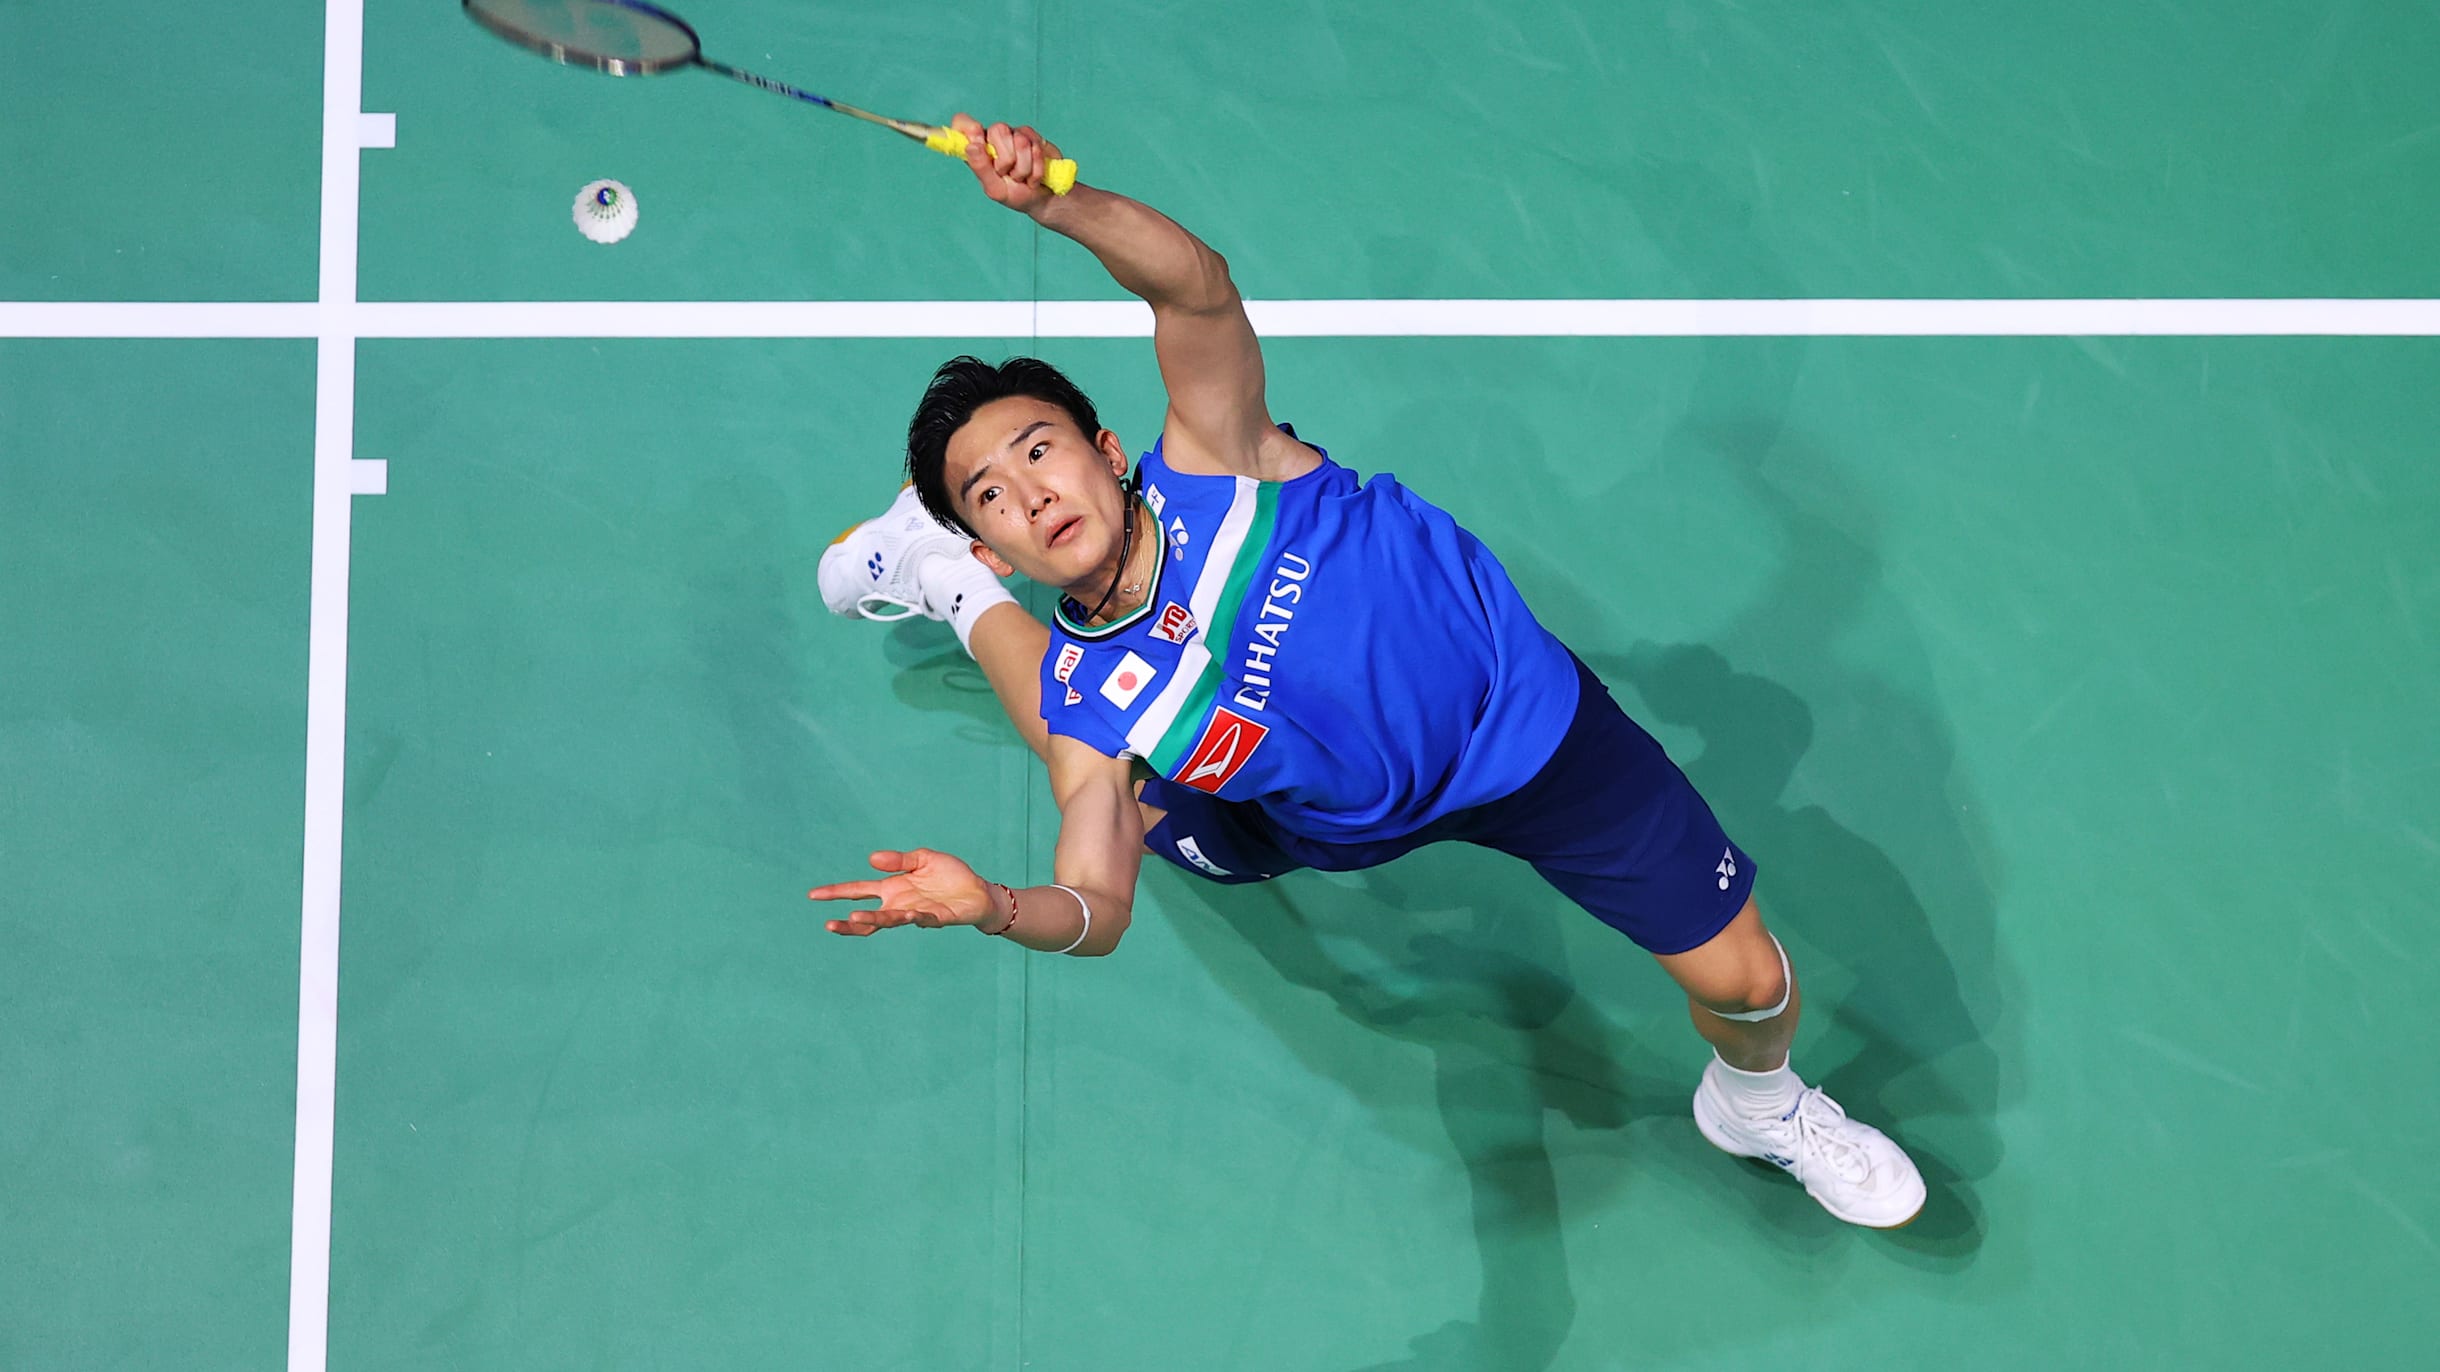 Olympic badminton at Tokyo 2020 Top five things to know